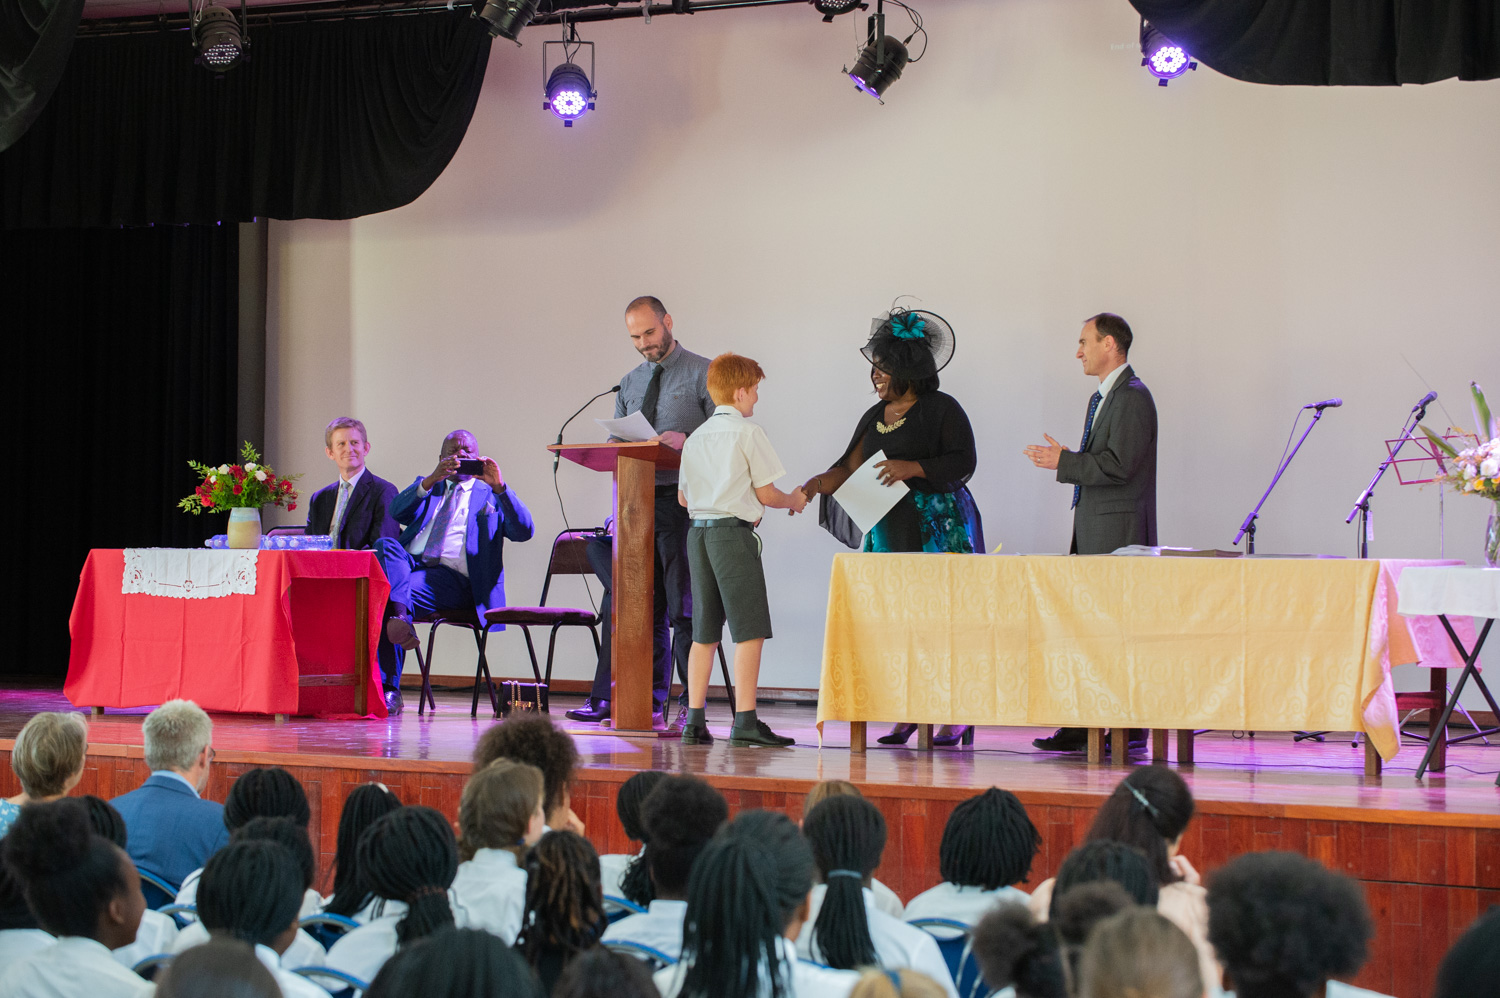 essay on prize giving ceremony at school